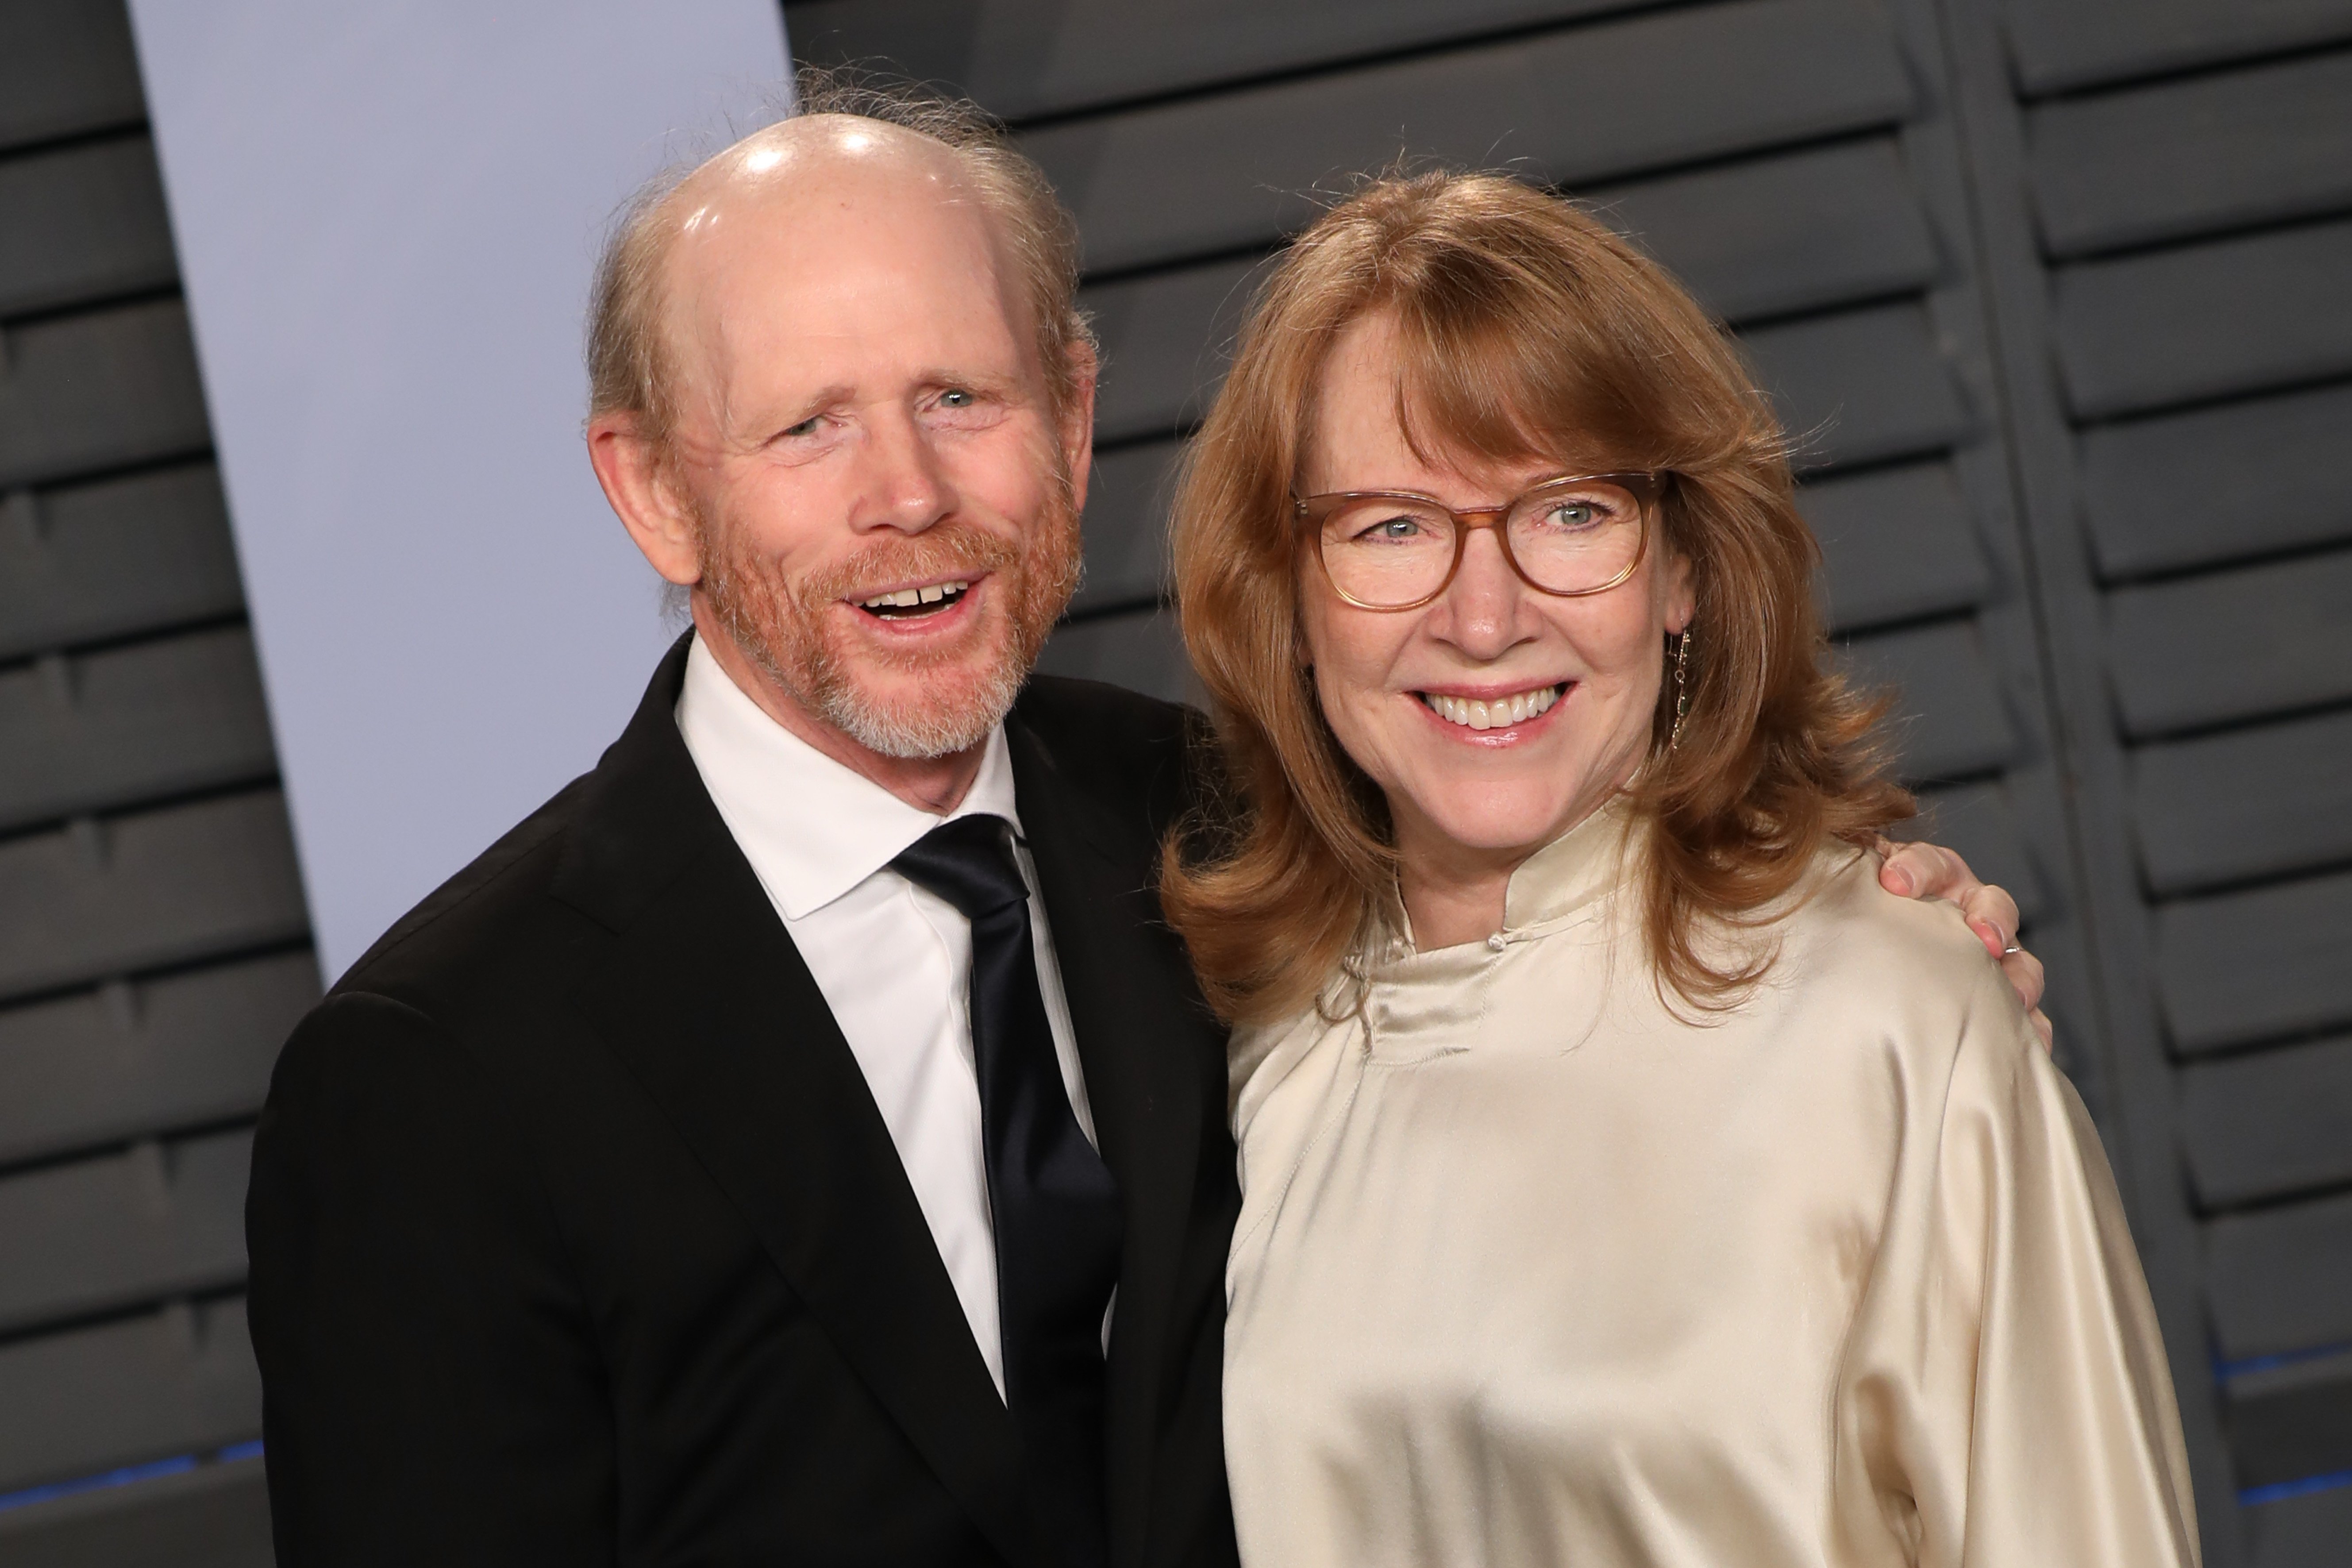 Ron Howard and Cheryl Howard, 2018 in Beverly Hills, California  | Source: Getty Images .